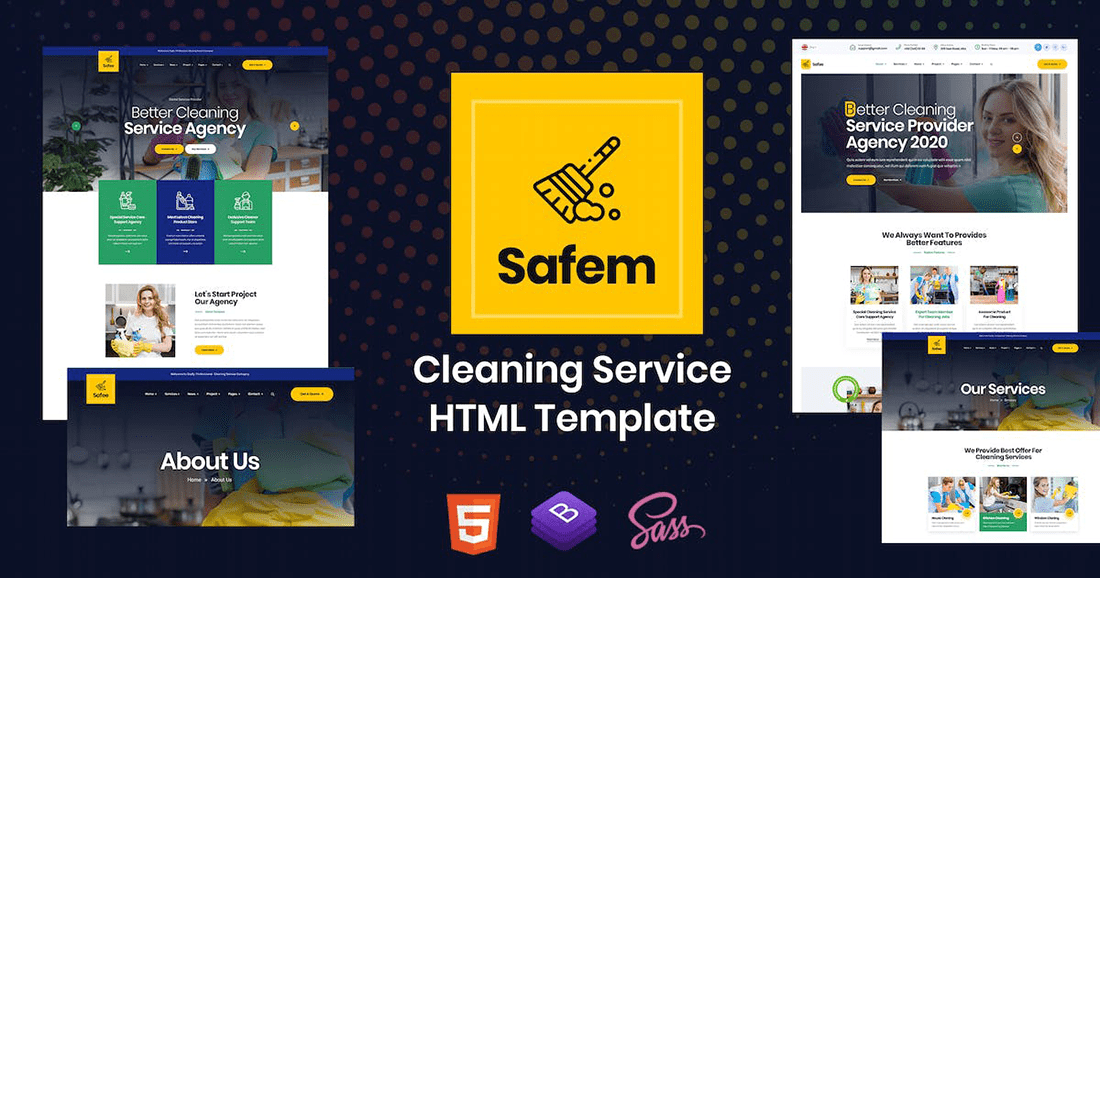 Free HTML Template for Cleaning Service cover image.